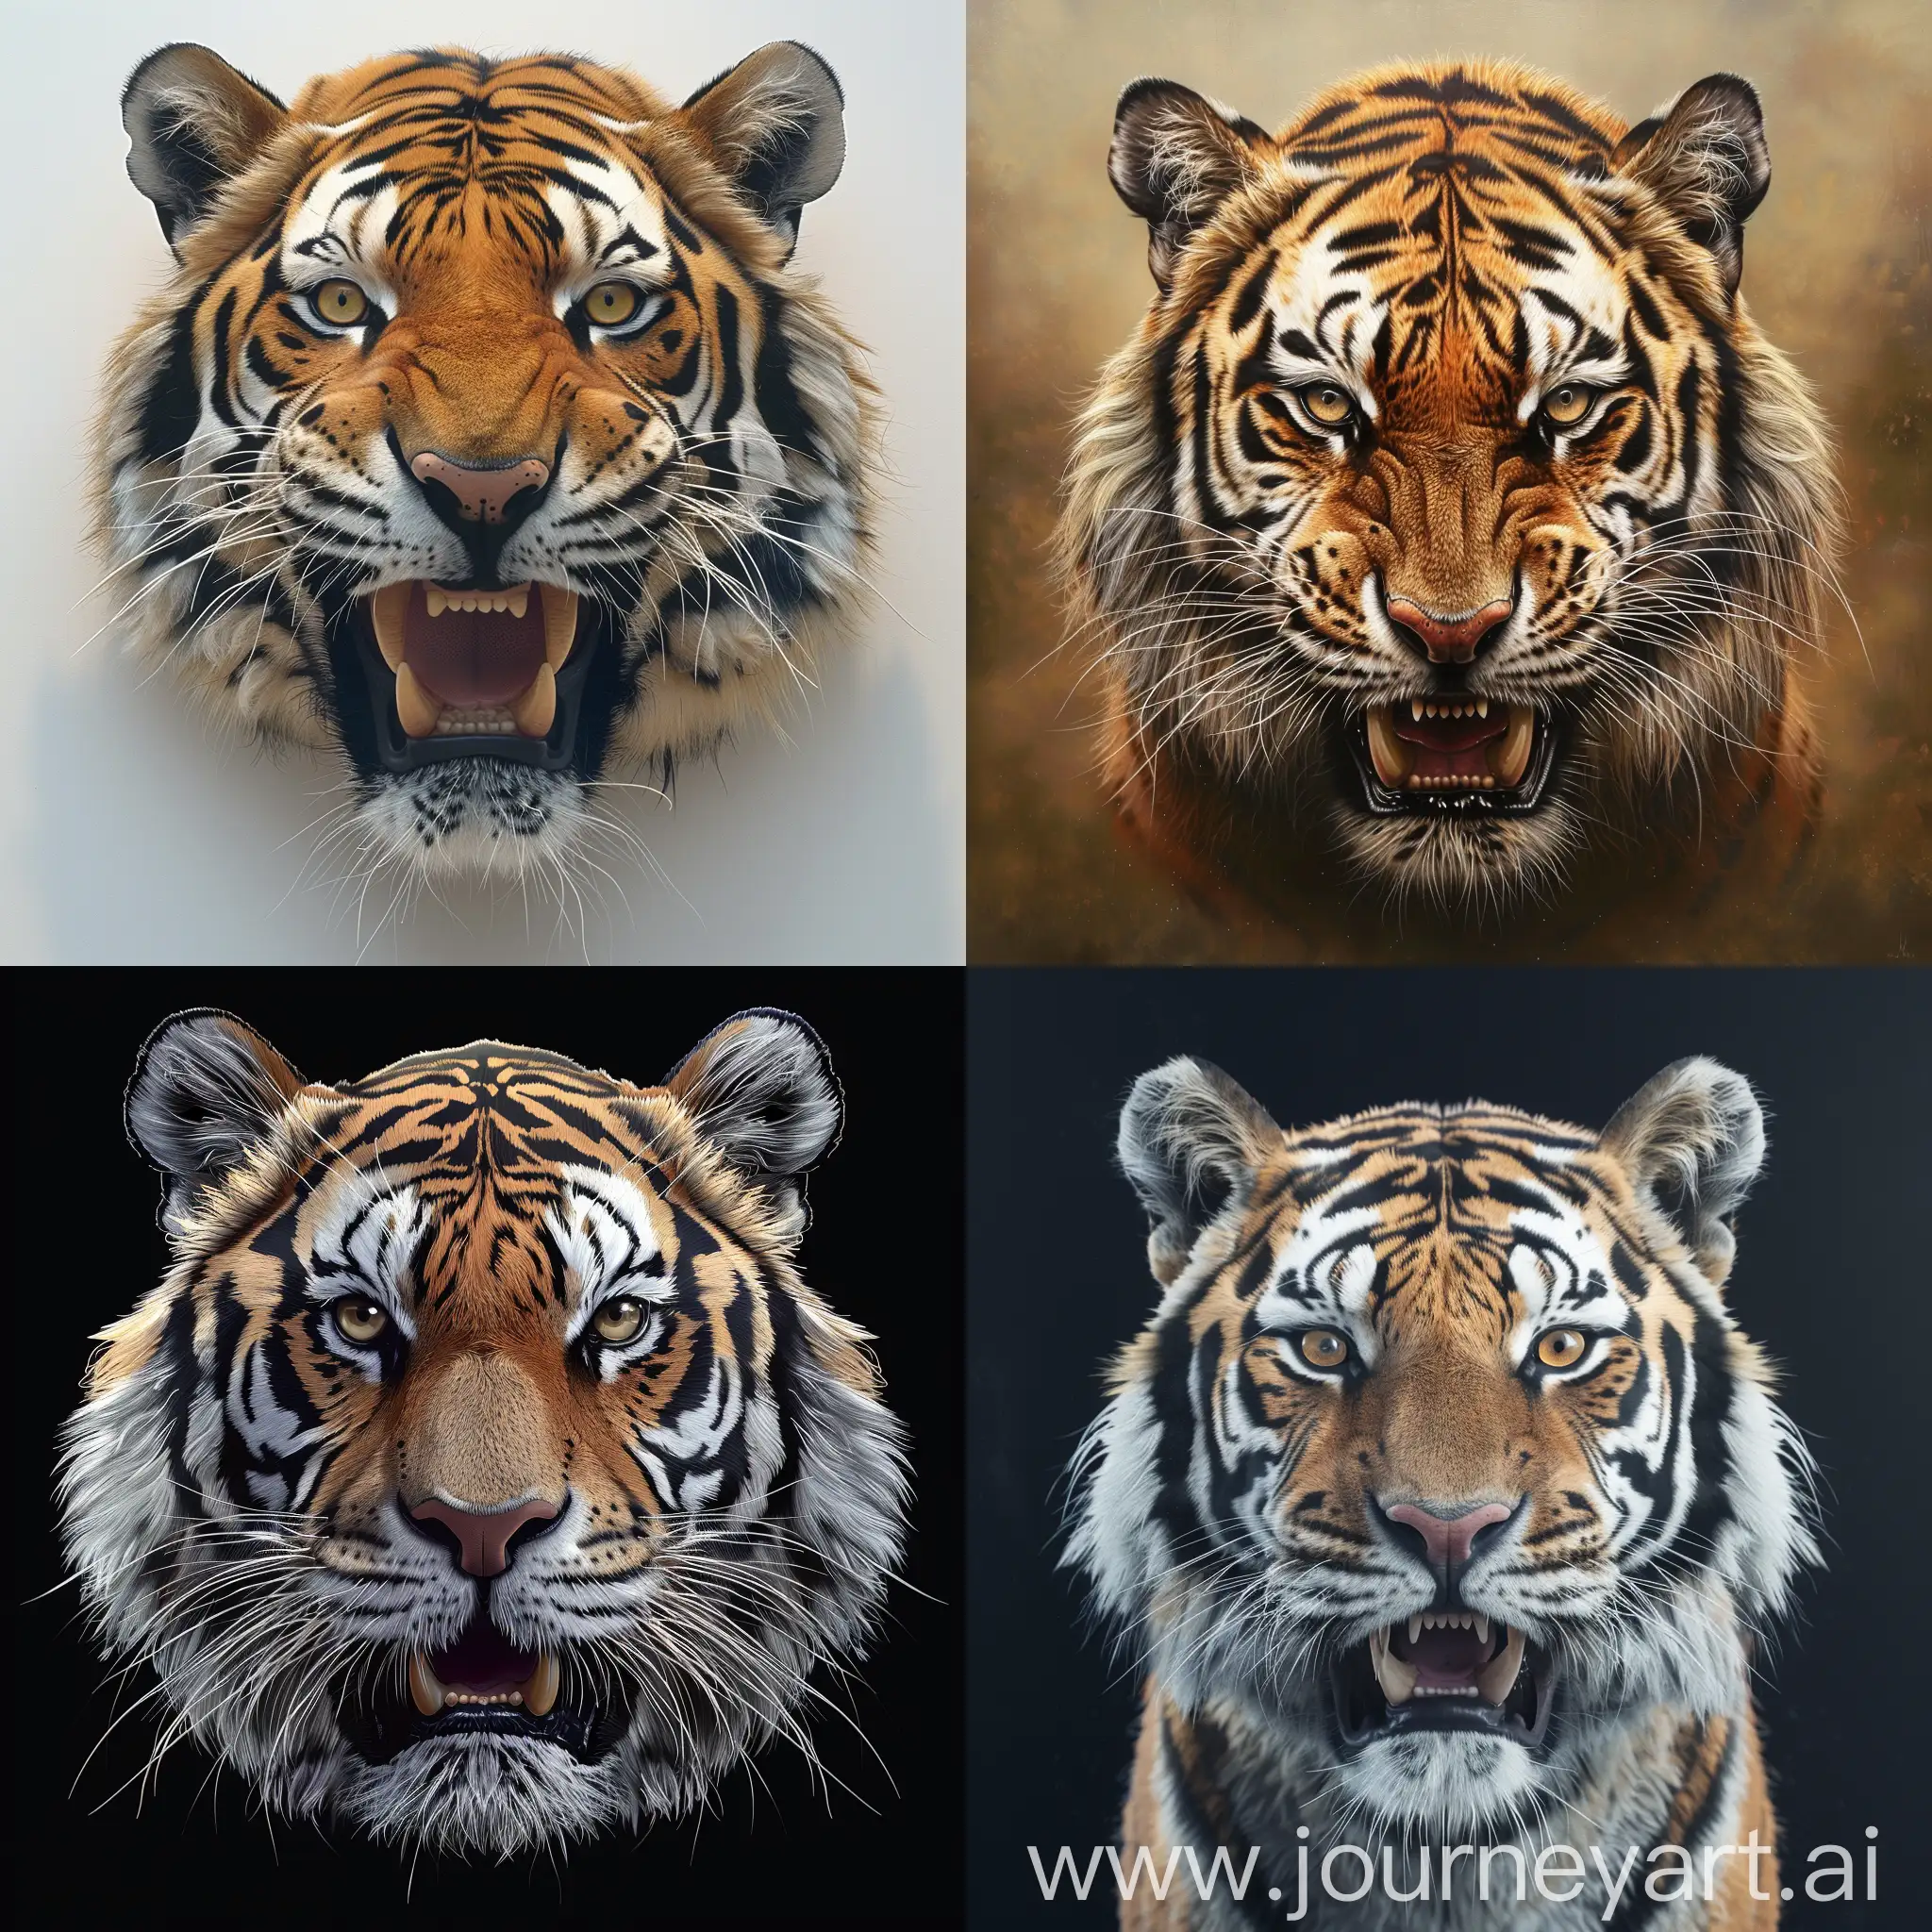 Fierce-Tiger-Head-with-Beastly-Grin-in-Photorealistic-Detail